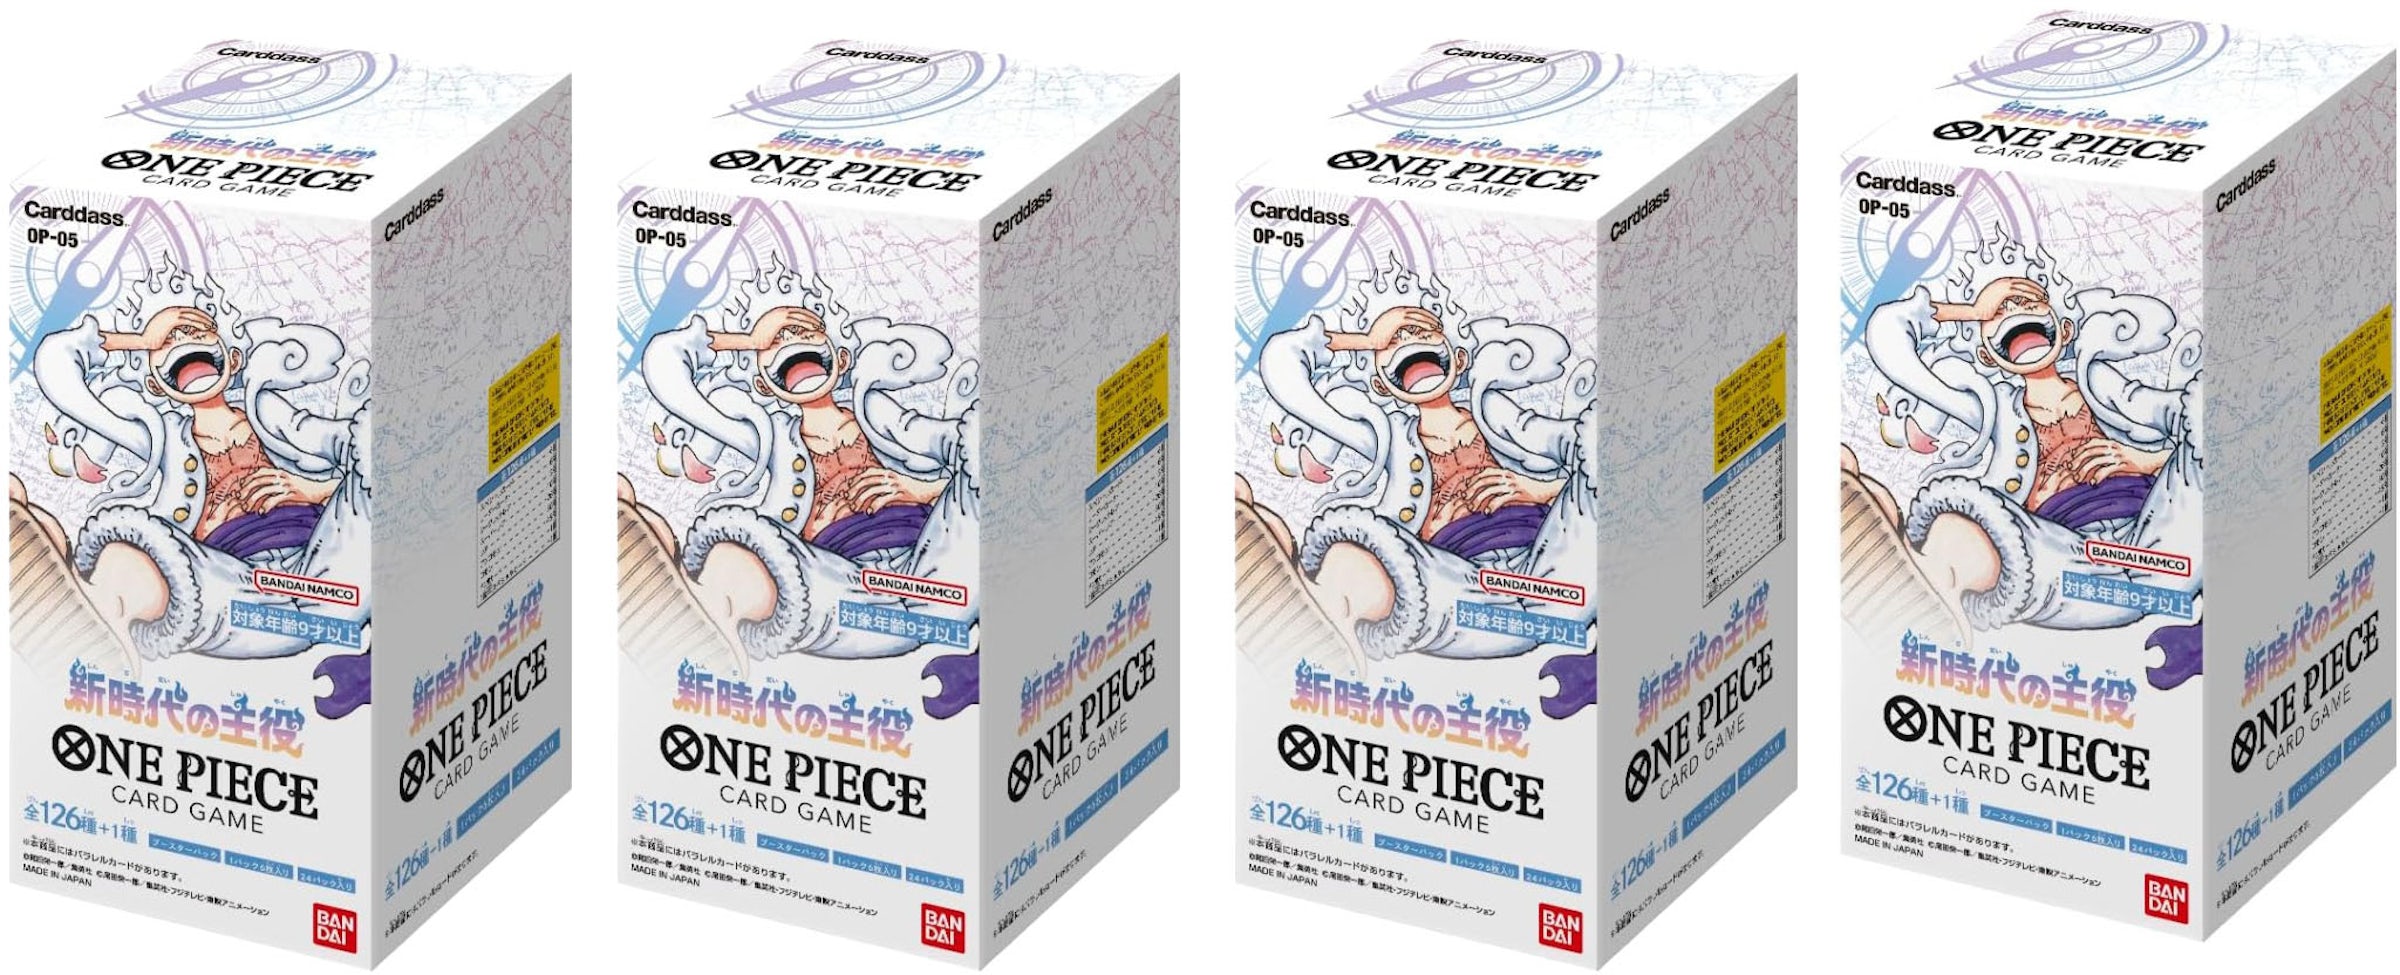 https://images.stockx.com/images/Bandai-One-Piece-Card-Game-Awakening-of-New-Era-Booster-Box-OP-05-Japanese-4x-Lot.jpg?fit=fill&bg=FFFFFF&w=1200&h=857&fm=jpg&auto=compress&dpr=2&trim=color&updated_at=1697742068&q=60